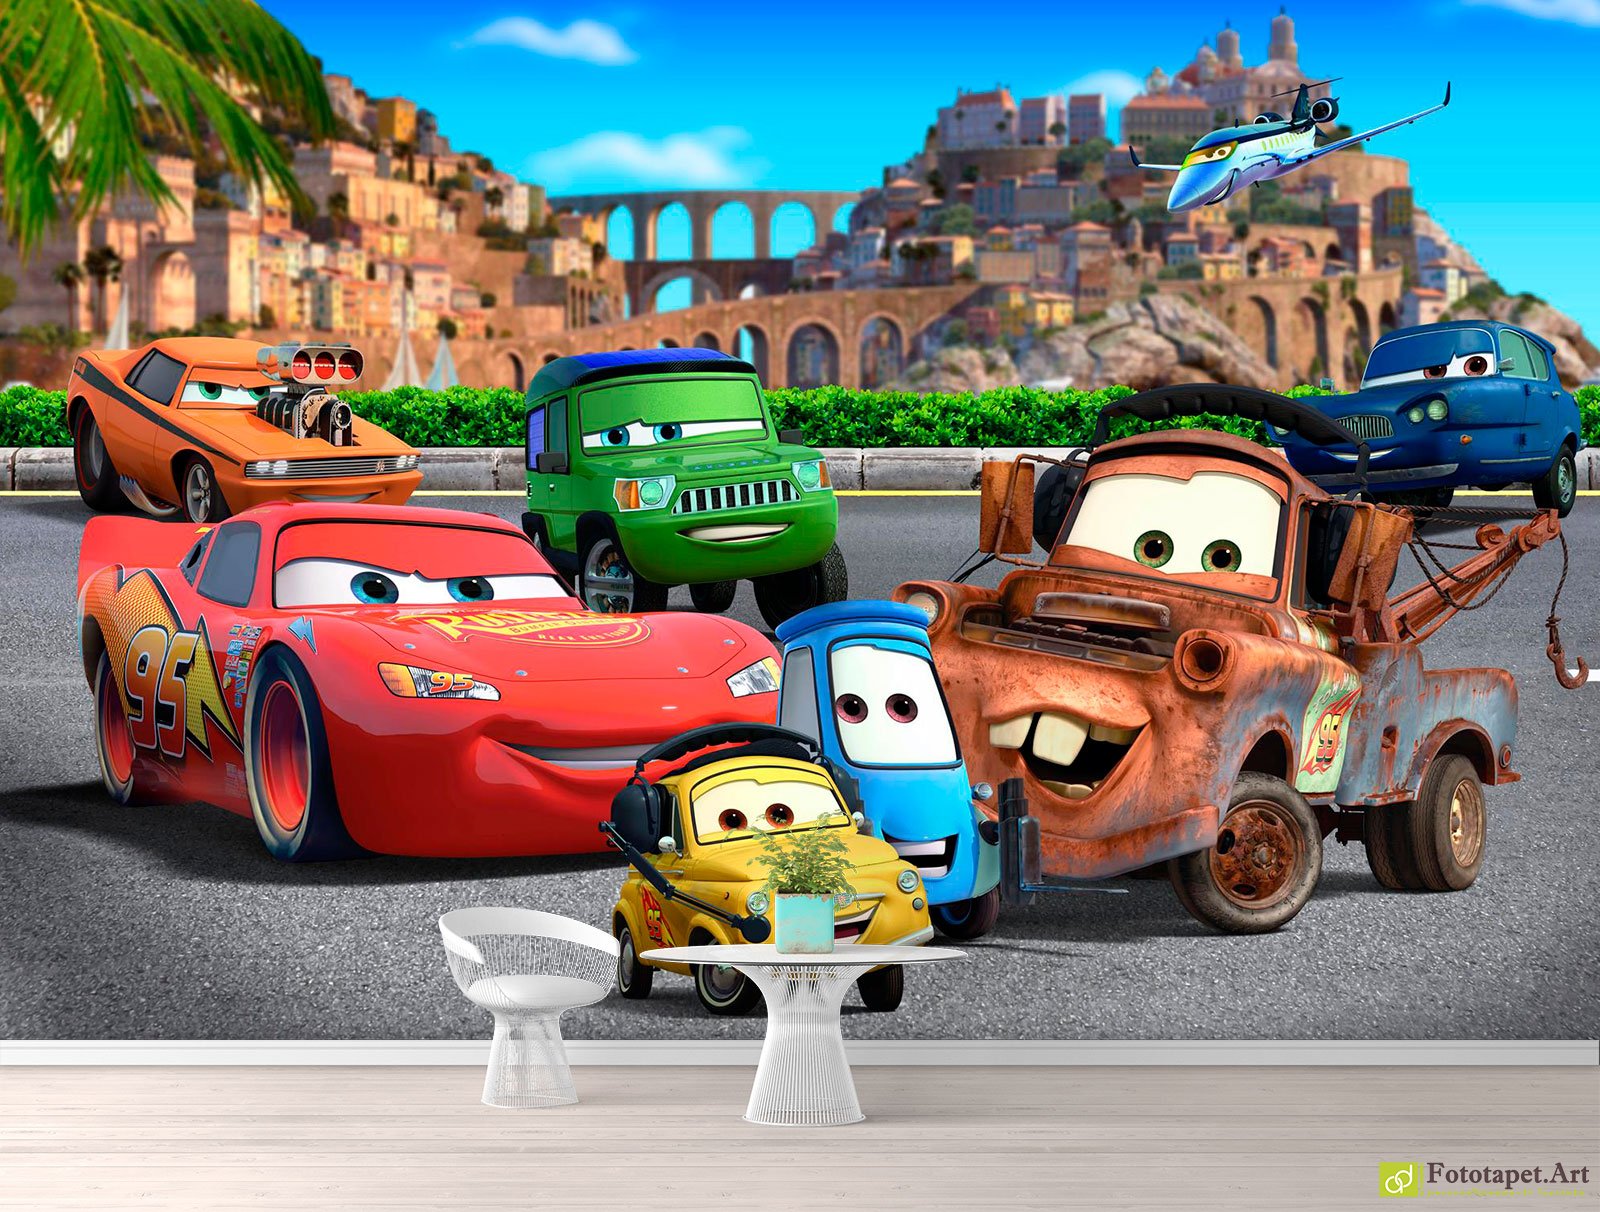 Children's Wallpaper & Wall Murals - Disney Cars on the Road |   Check out our stunning photo wallpaper options for a quality